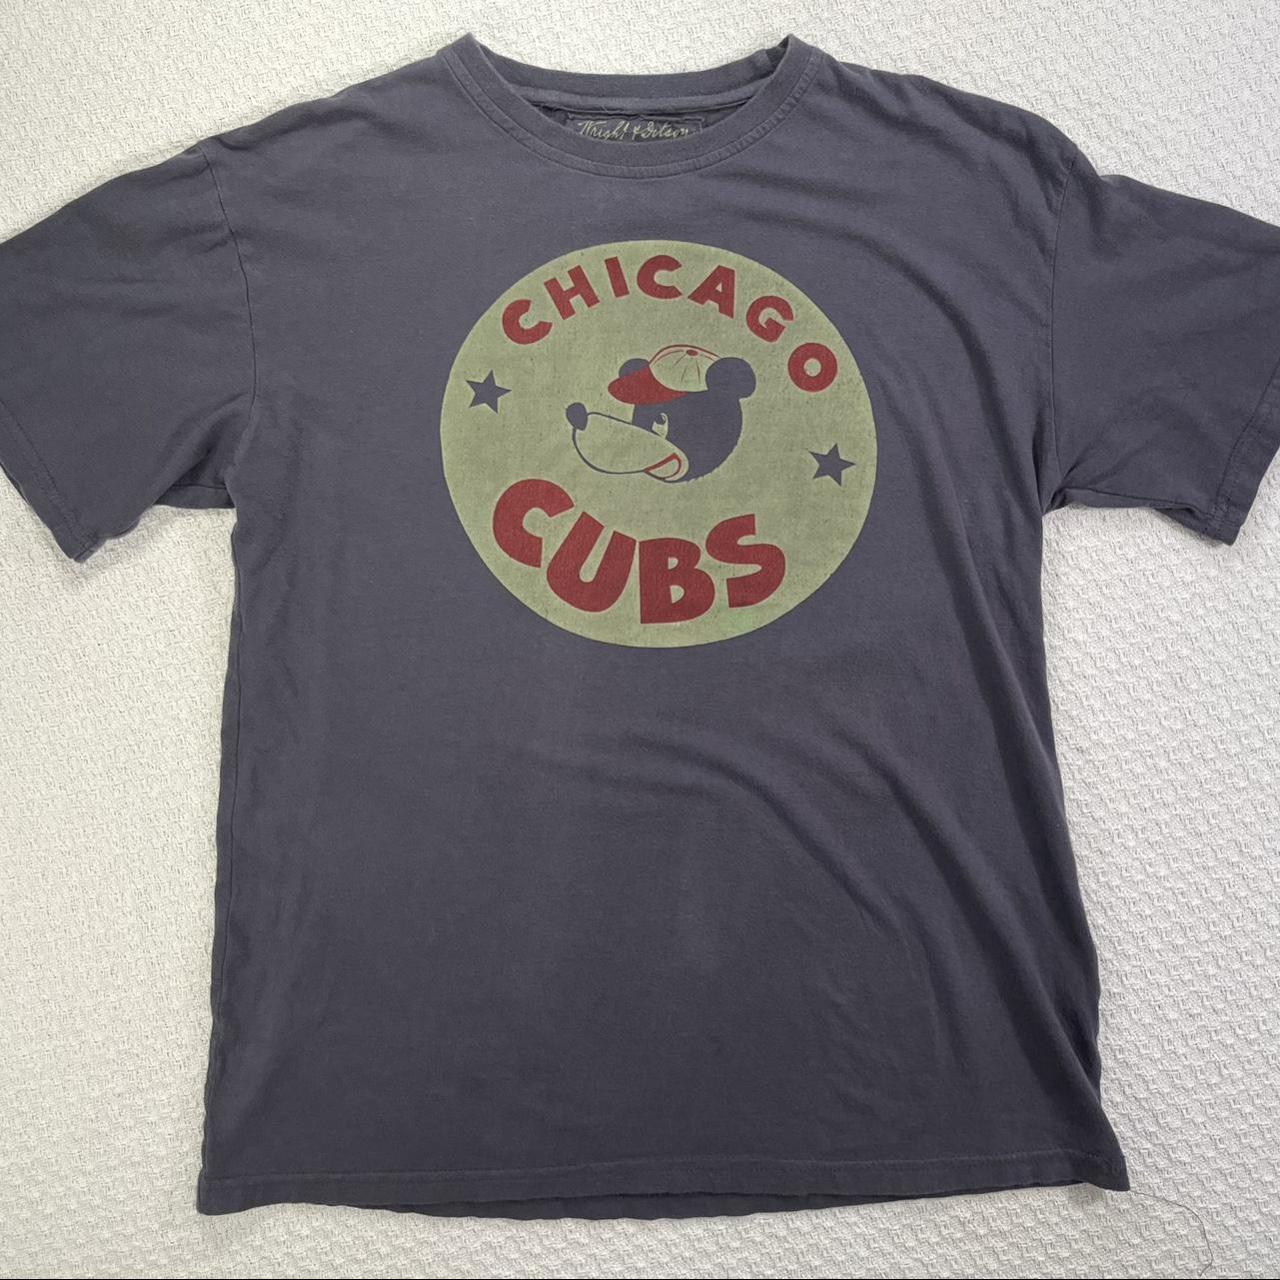 Wright & Ditson, Shirts, Chicago Cubs Tee Grey Xxl